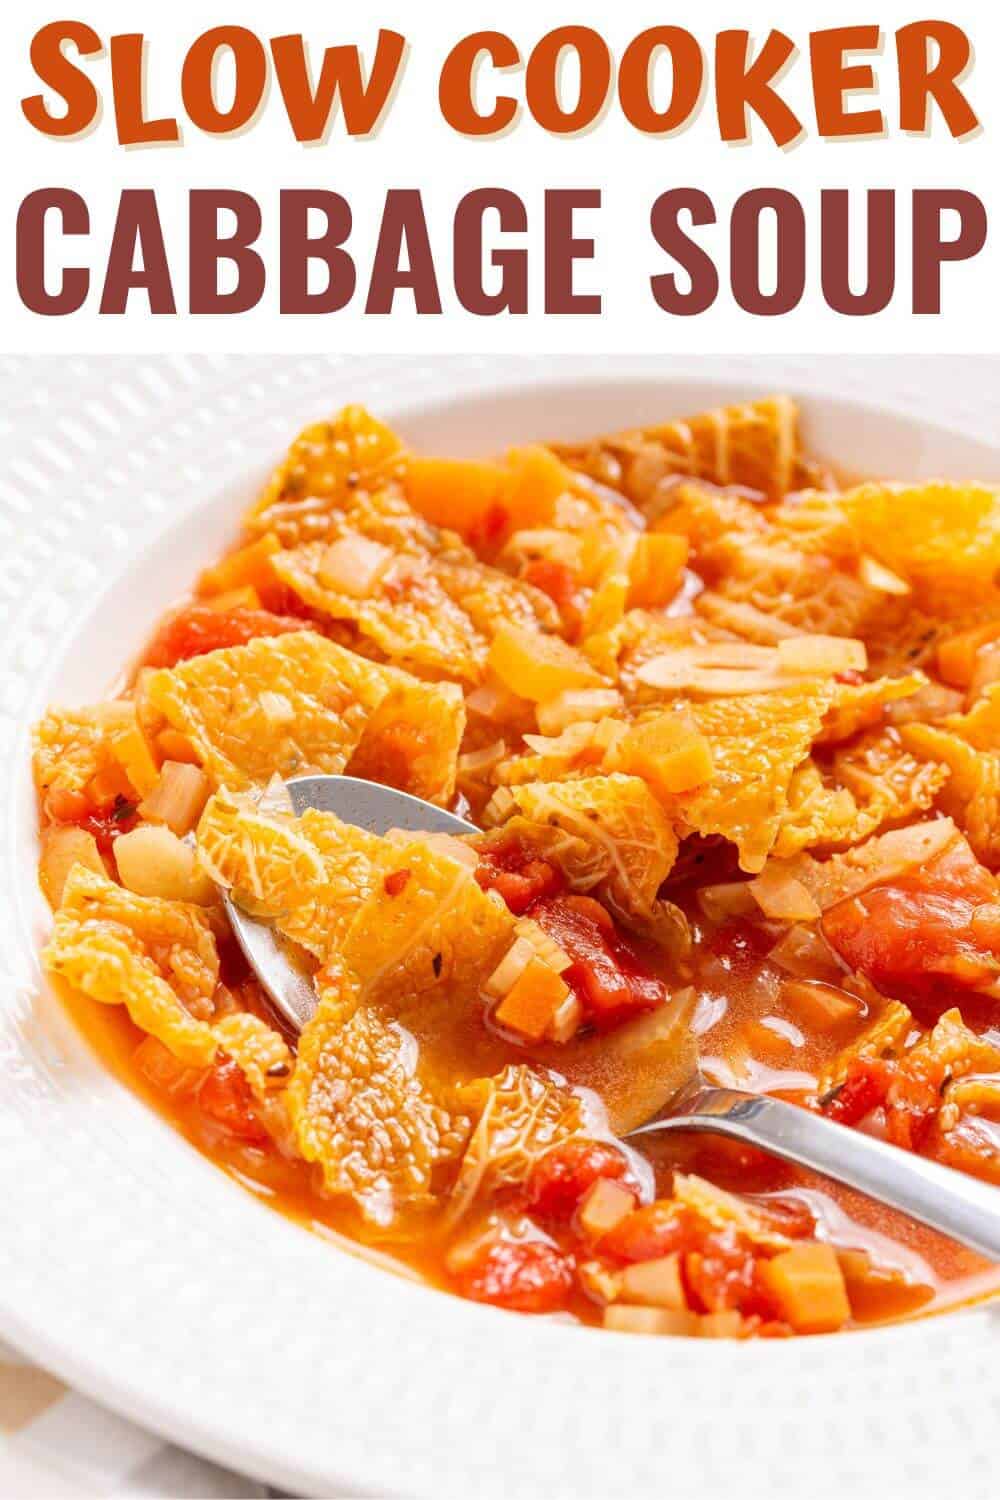 Slow cooker cabbage soup on a white plate.